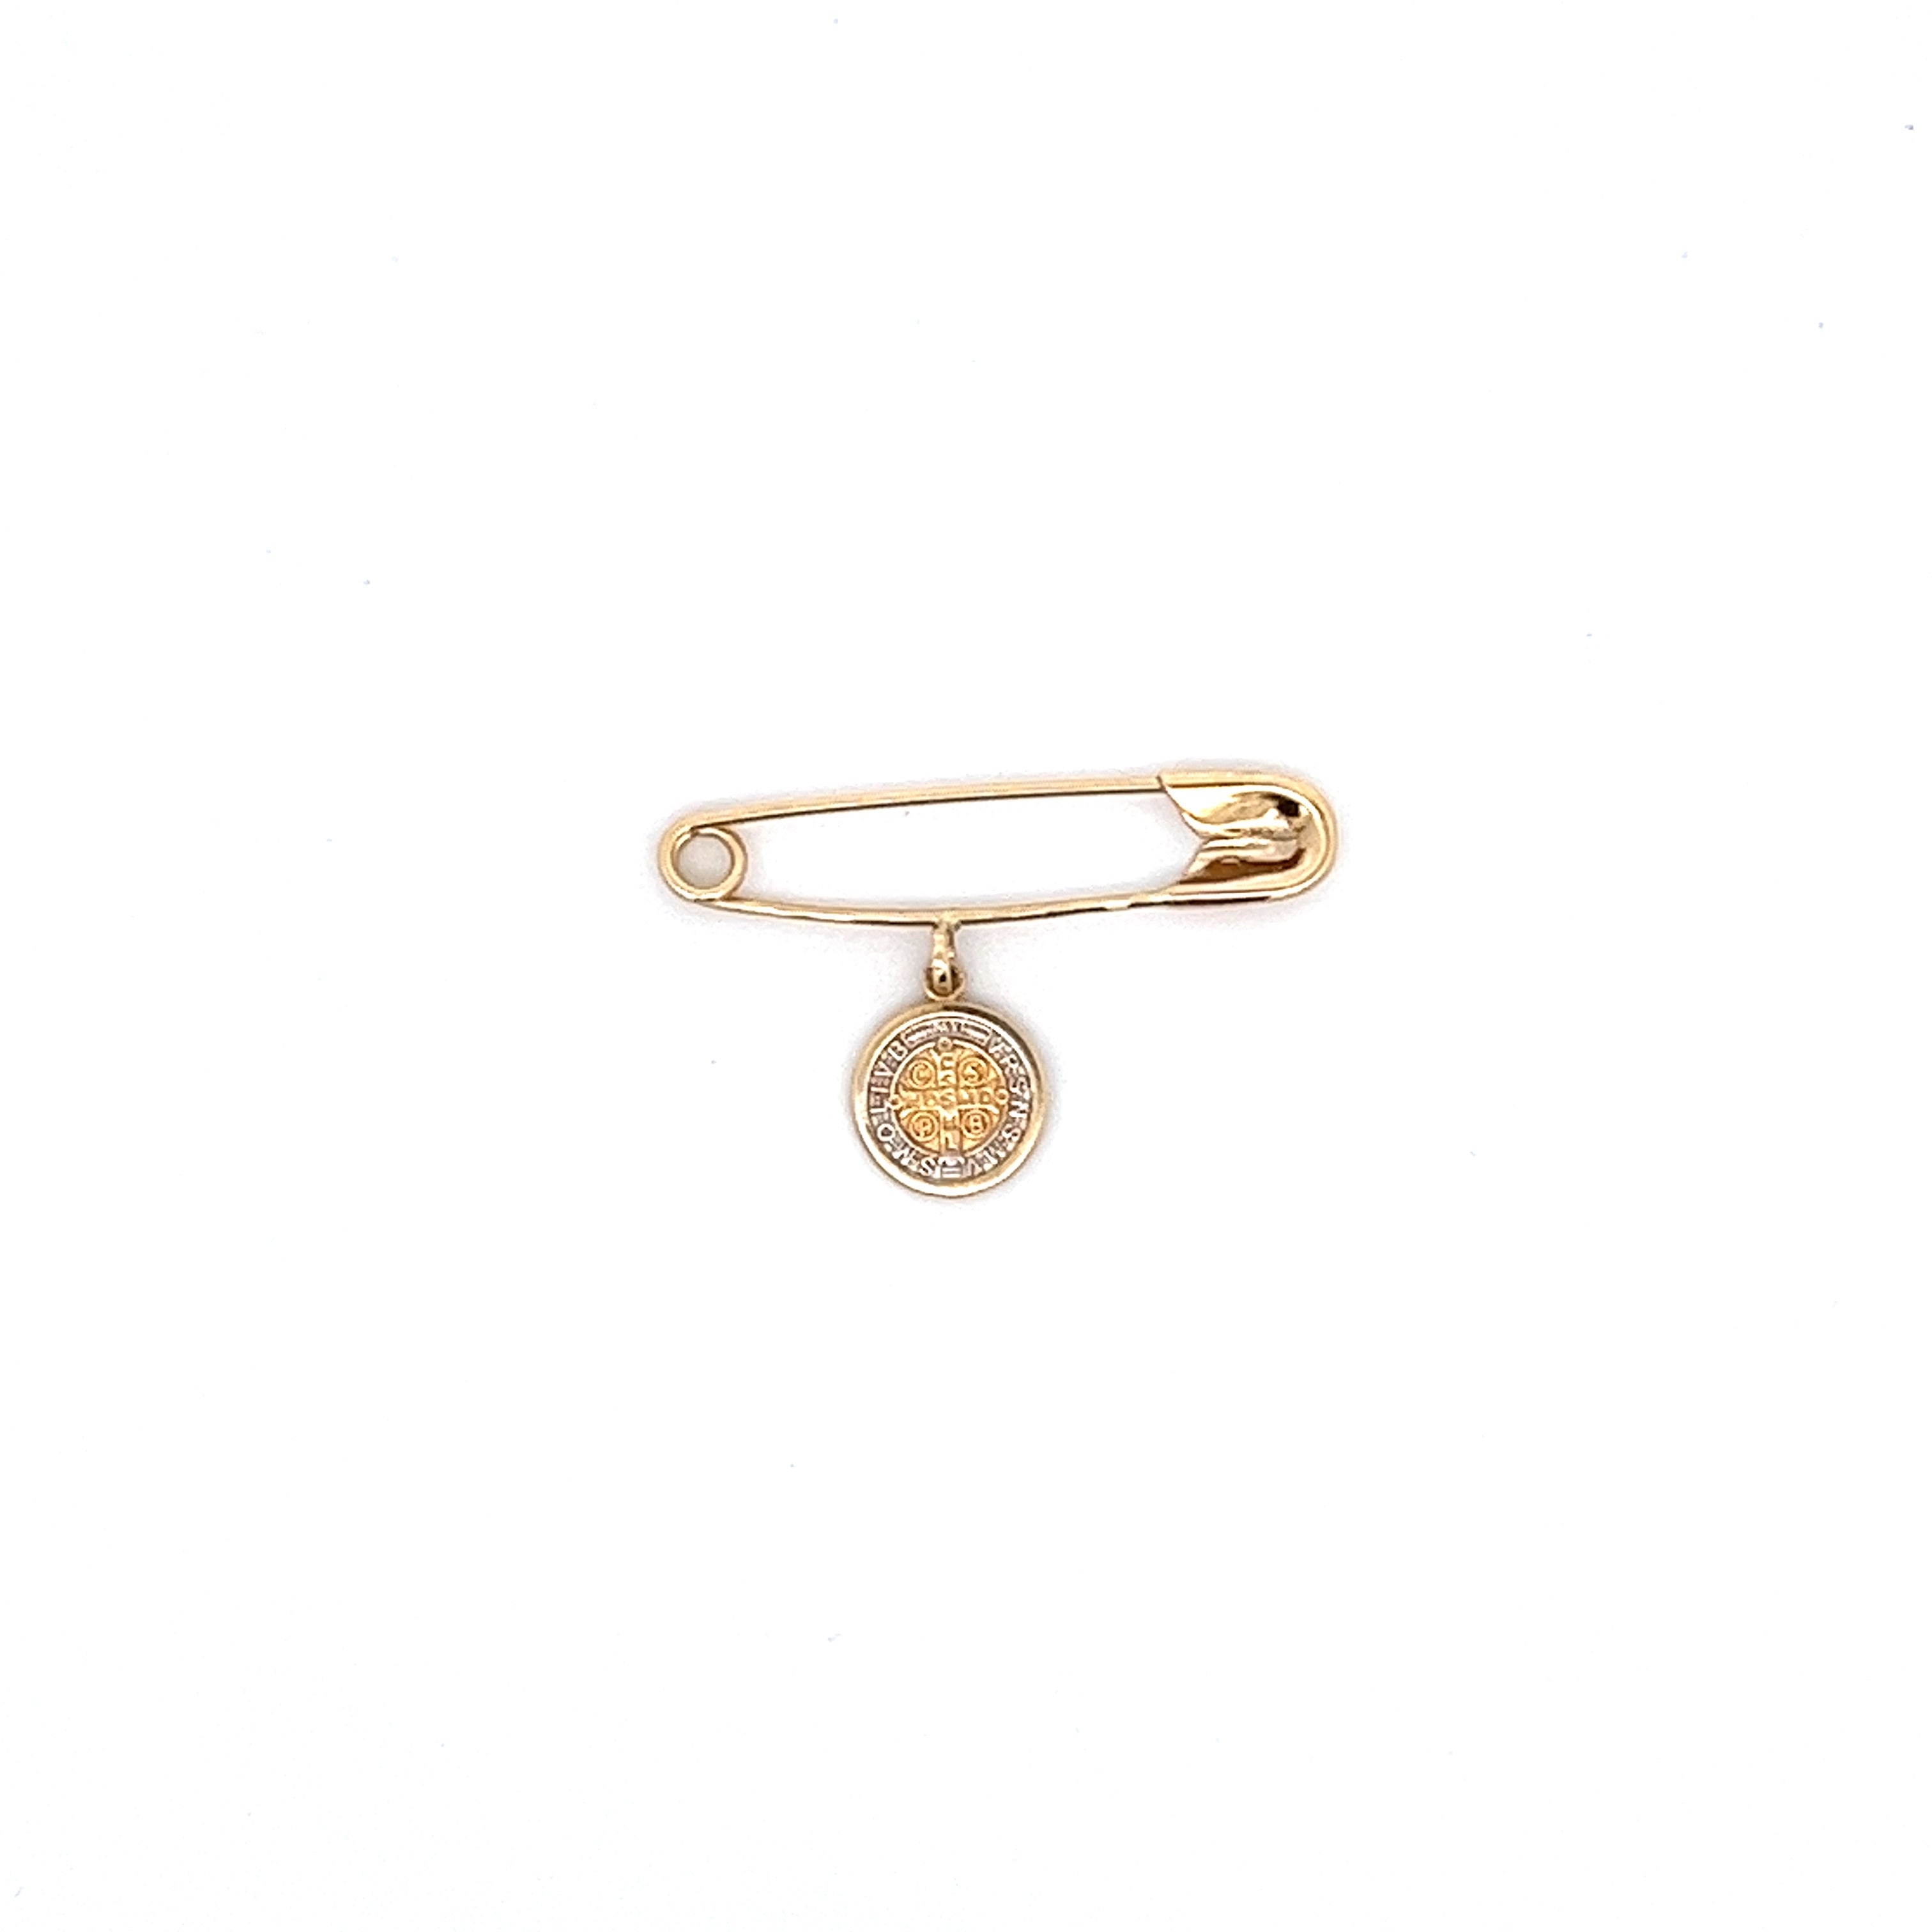 14K WHITE AND GOLD PIN WITH SAINT BENEDICT MEDAL